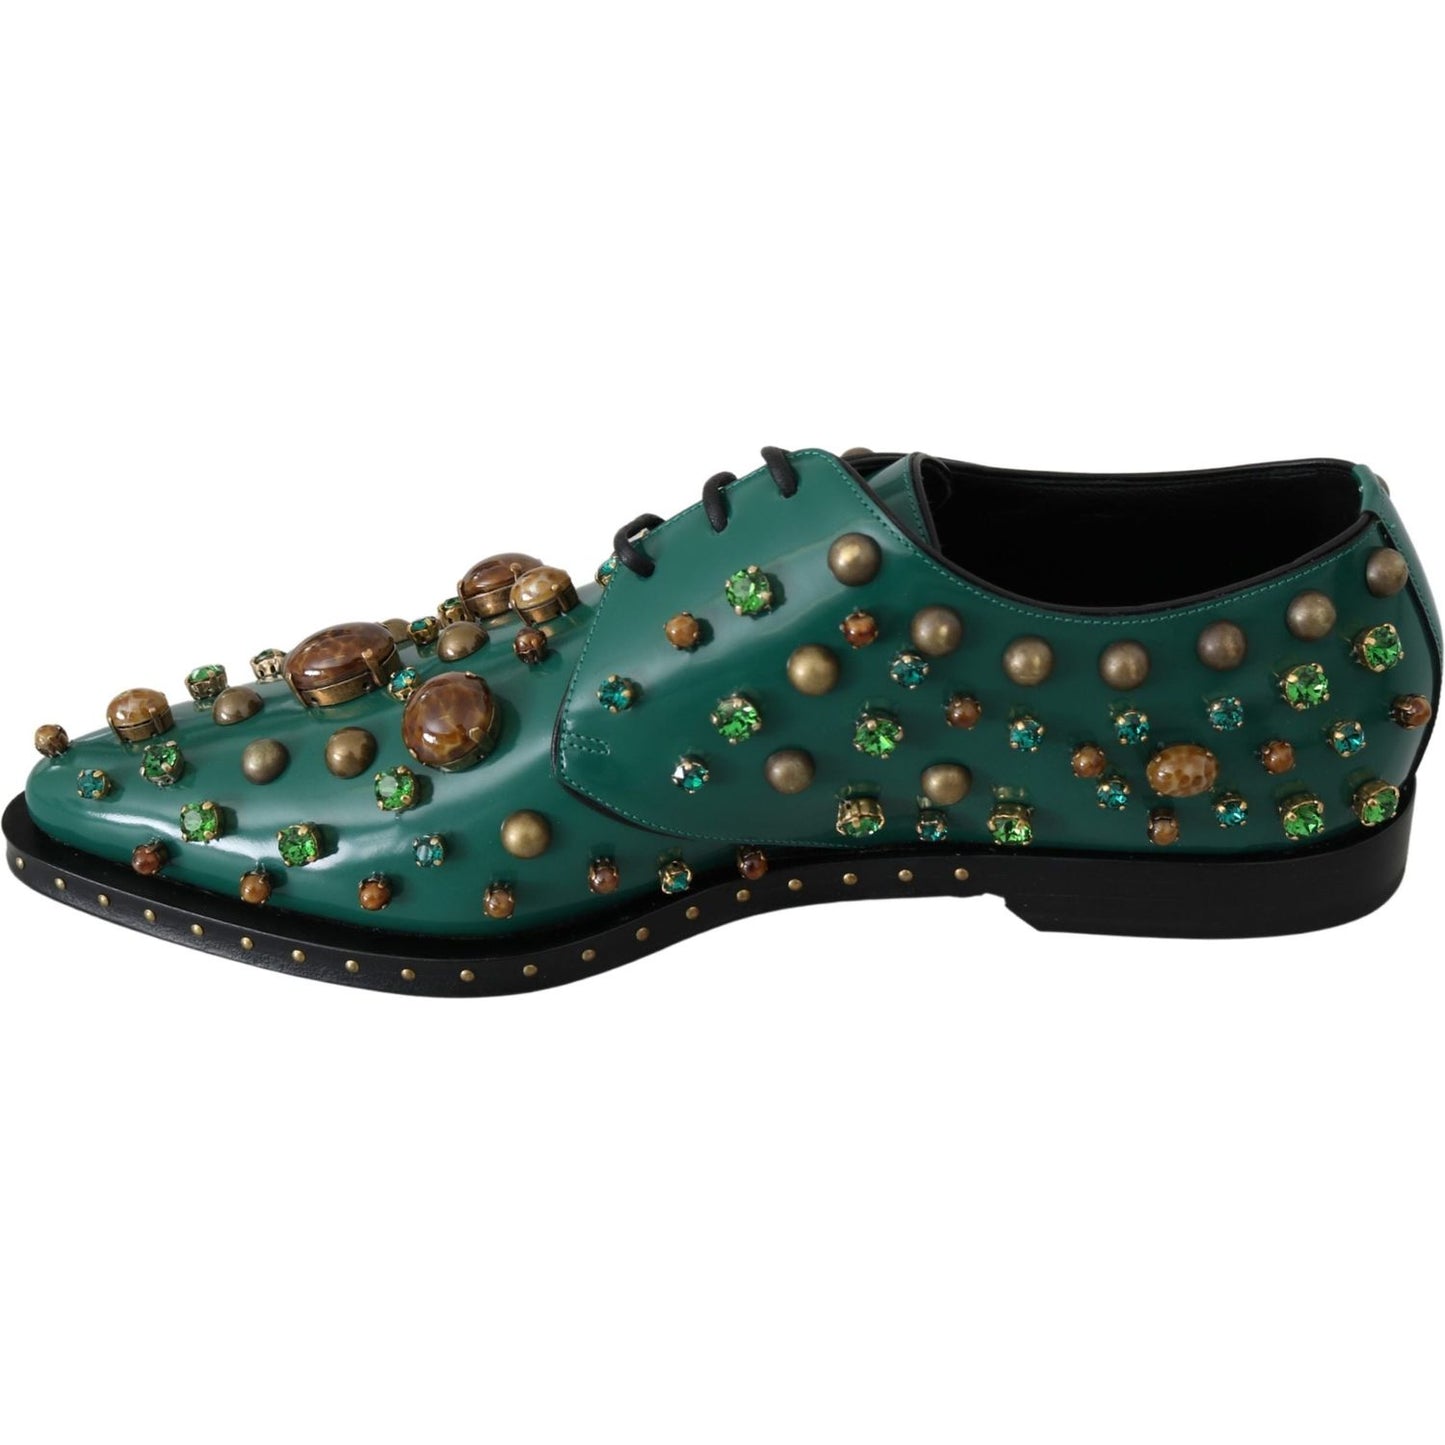 Dolce & Gabbana Emerald Leather Dress Shoes with Crystal Accents green-leather-crystal-dress-broque-shoes IMG_1558-scaled-136f94d5-5af.jpg